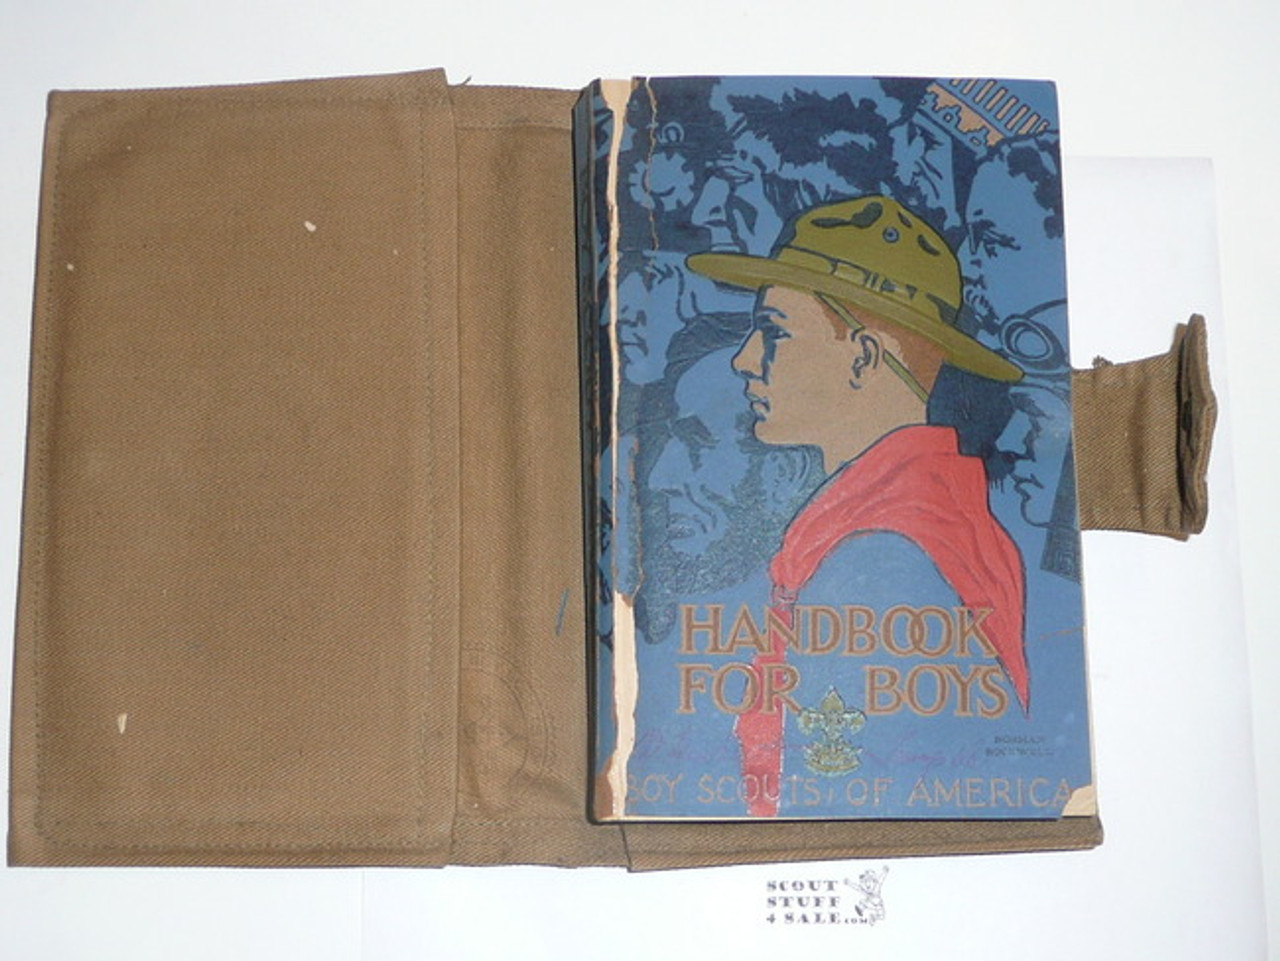 1929 Boy Scout Handbook in the Offical BSA Canvas Book Cover, Third Edition, eighth Printing , Norman Rockwell Cover, cover separated from spine